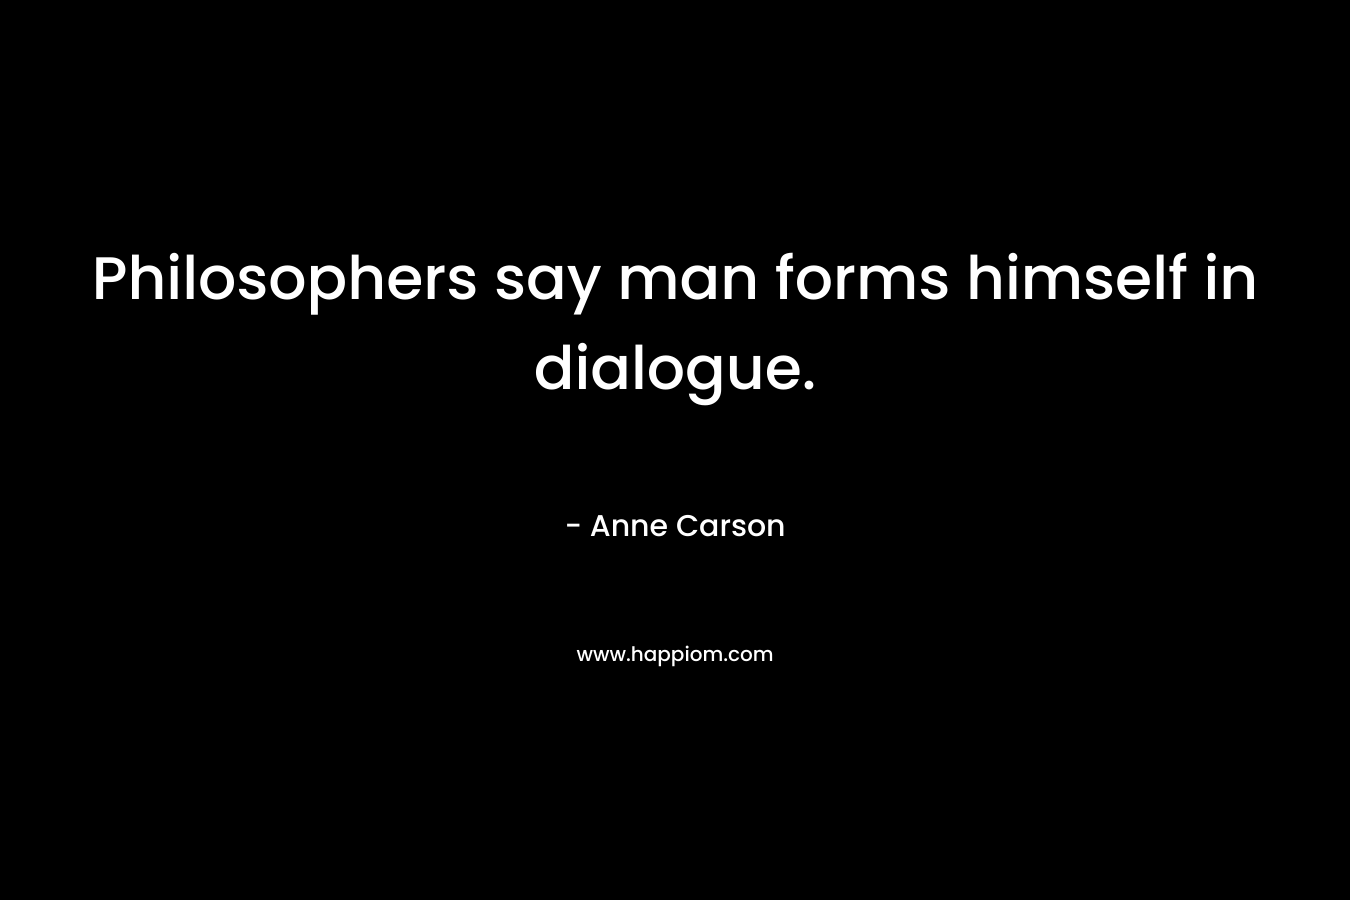 Philosophers say man forms himself in dialogue.